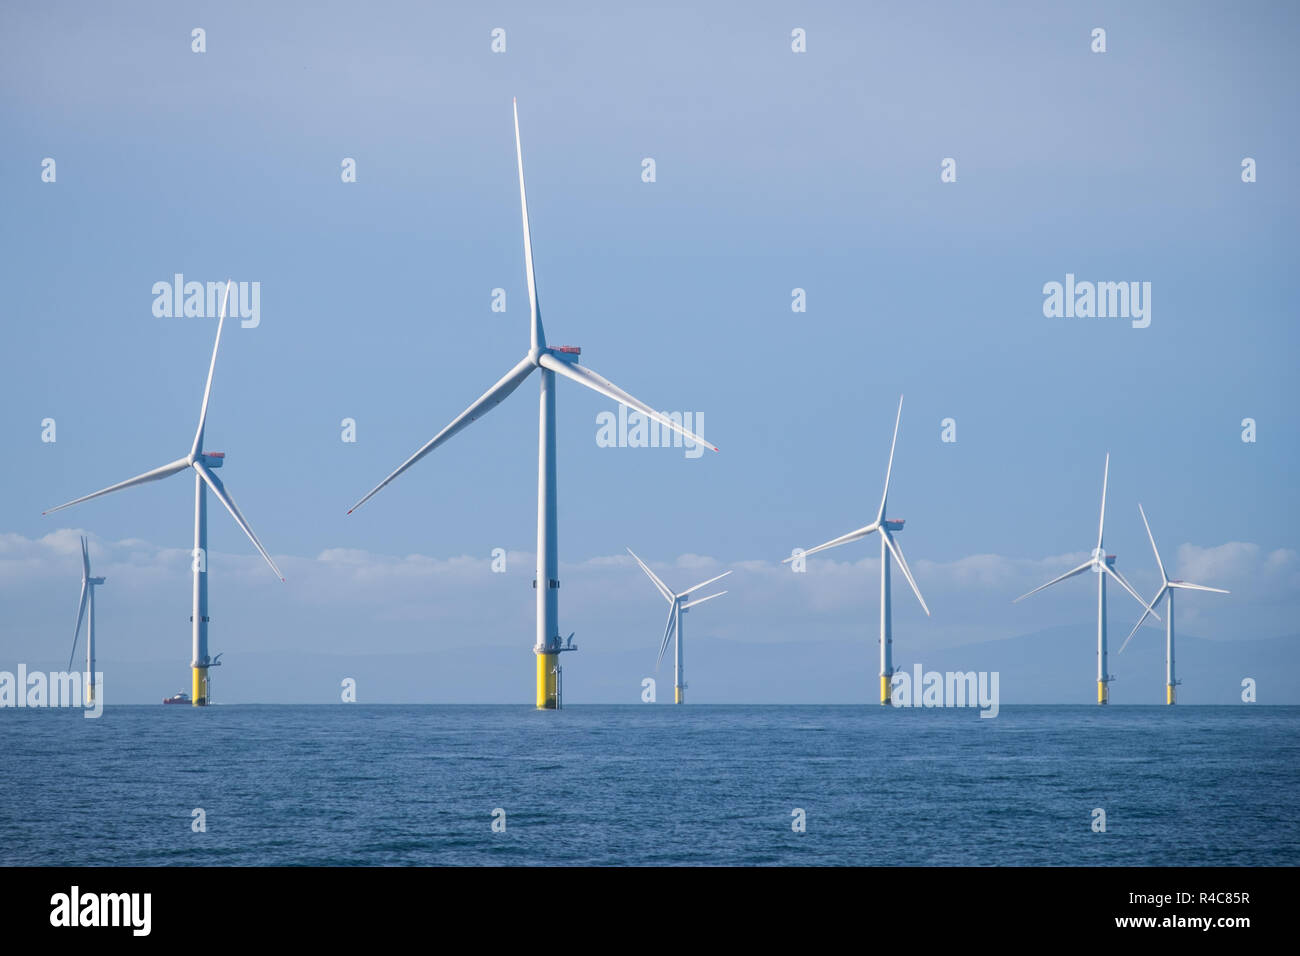 MHI Vestas V164-8.0MW wind turbines on the Walney Extension Offshore wind farm, the world's largest offshore wind farm. The turbines are one of the mo Stock Photo